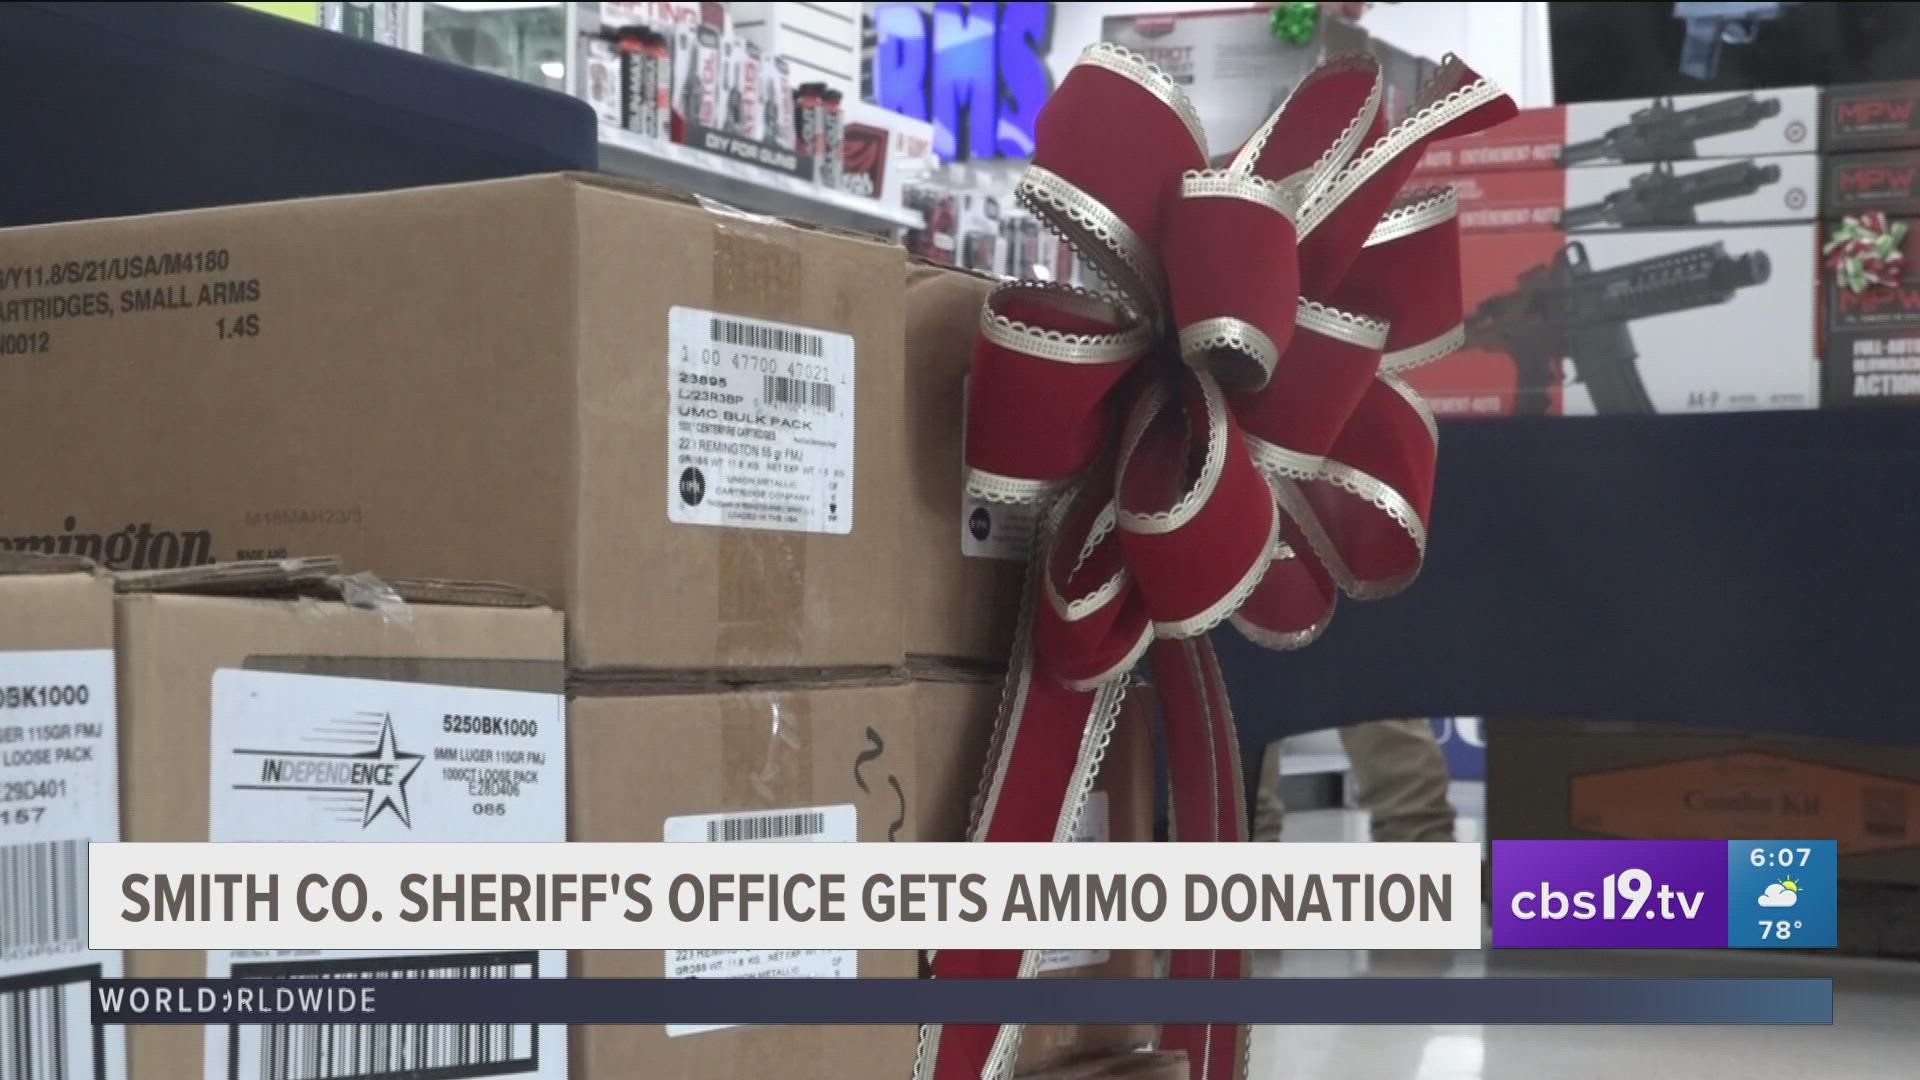 The owner of Superior Firearms donated 20,000 rounds of ammo to the Smith County Sheriff's Office as they have dealing with an ammo shortage for the past two years.